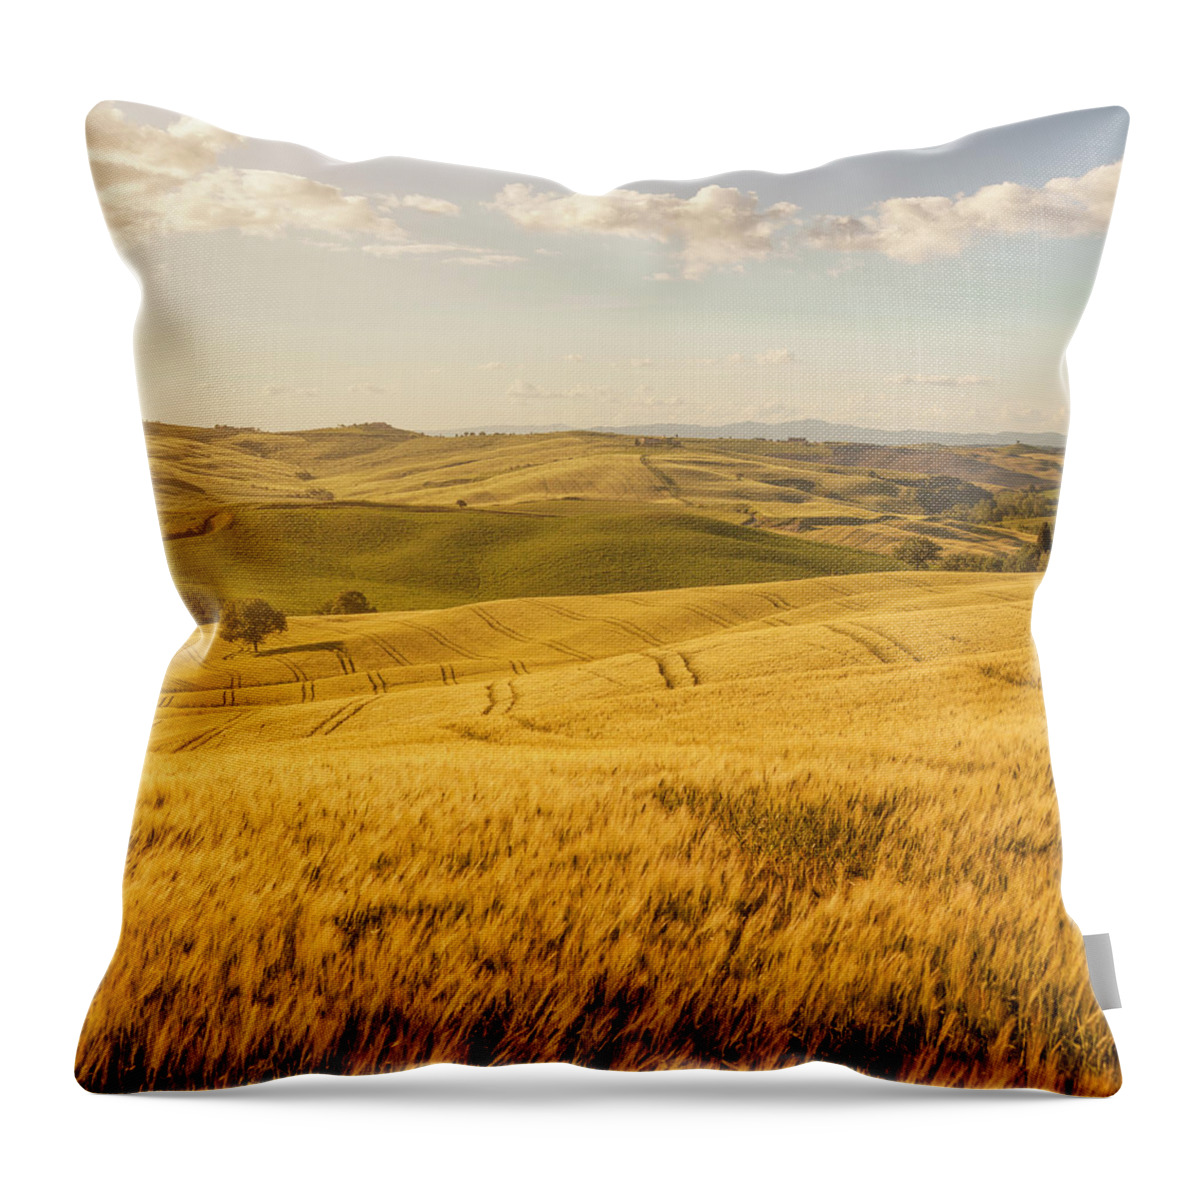 Scenics Throw Pillow featuring the photograph Sunset Tuscany Landscape by Focusstock